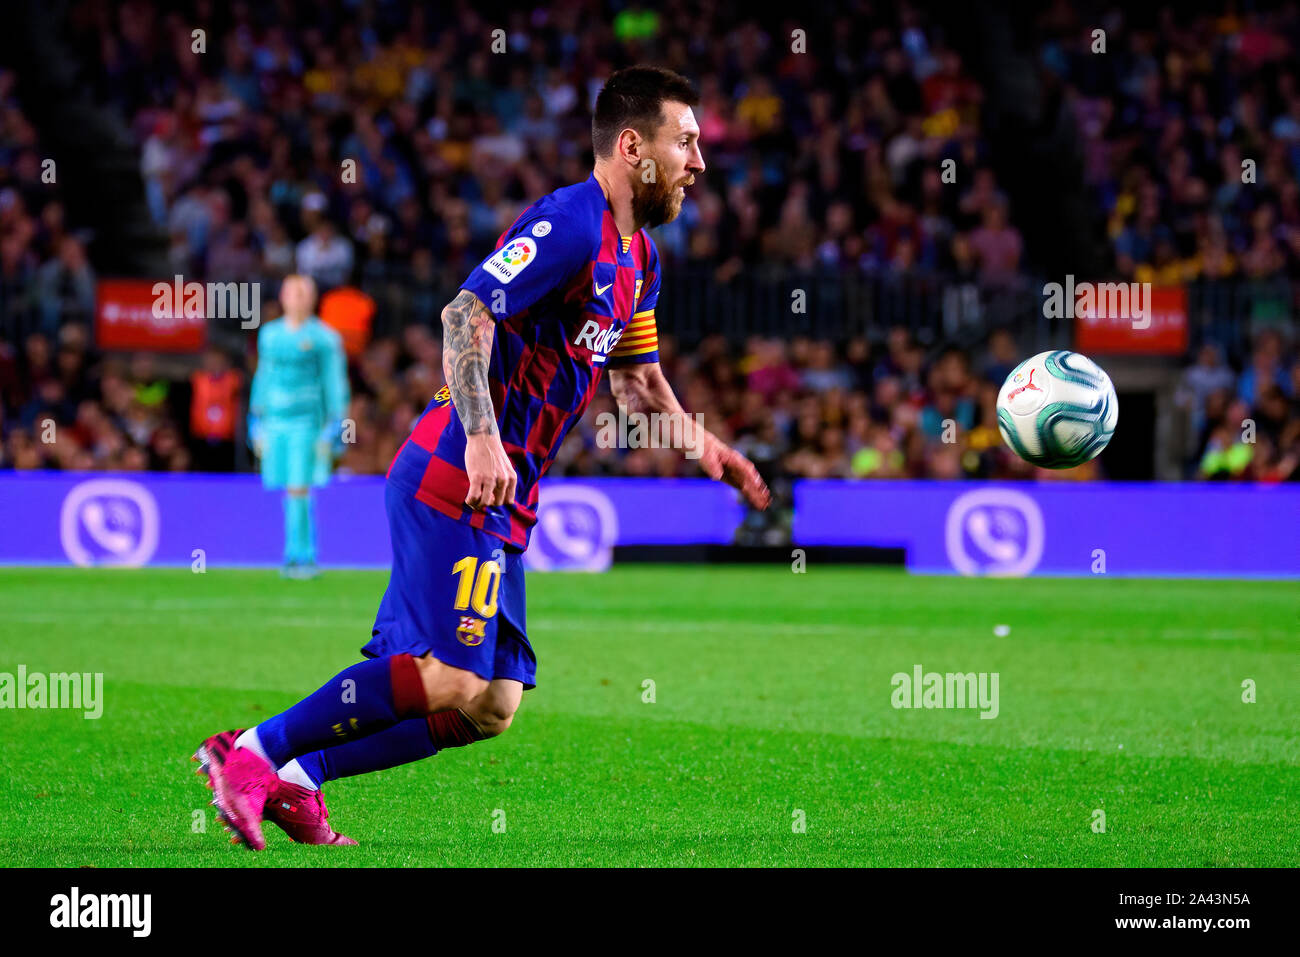 BARCELONA - OCT 6: Lionel Messi plays at the La Liga match between FC Barcelona and Sevilla FC at the Camp Nou Stadium on October 6, 2019 in Barcelona Stock Photo